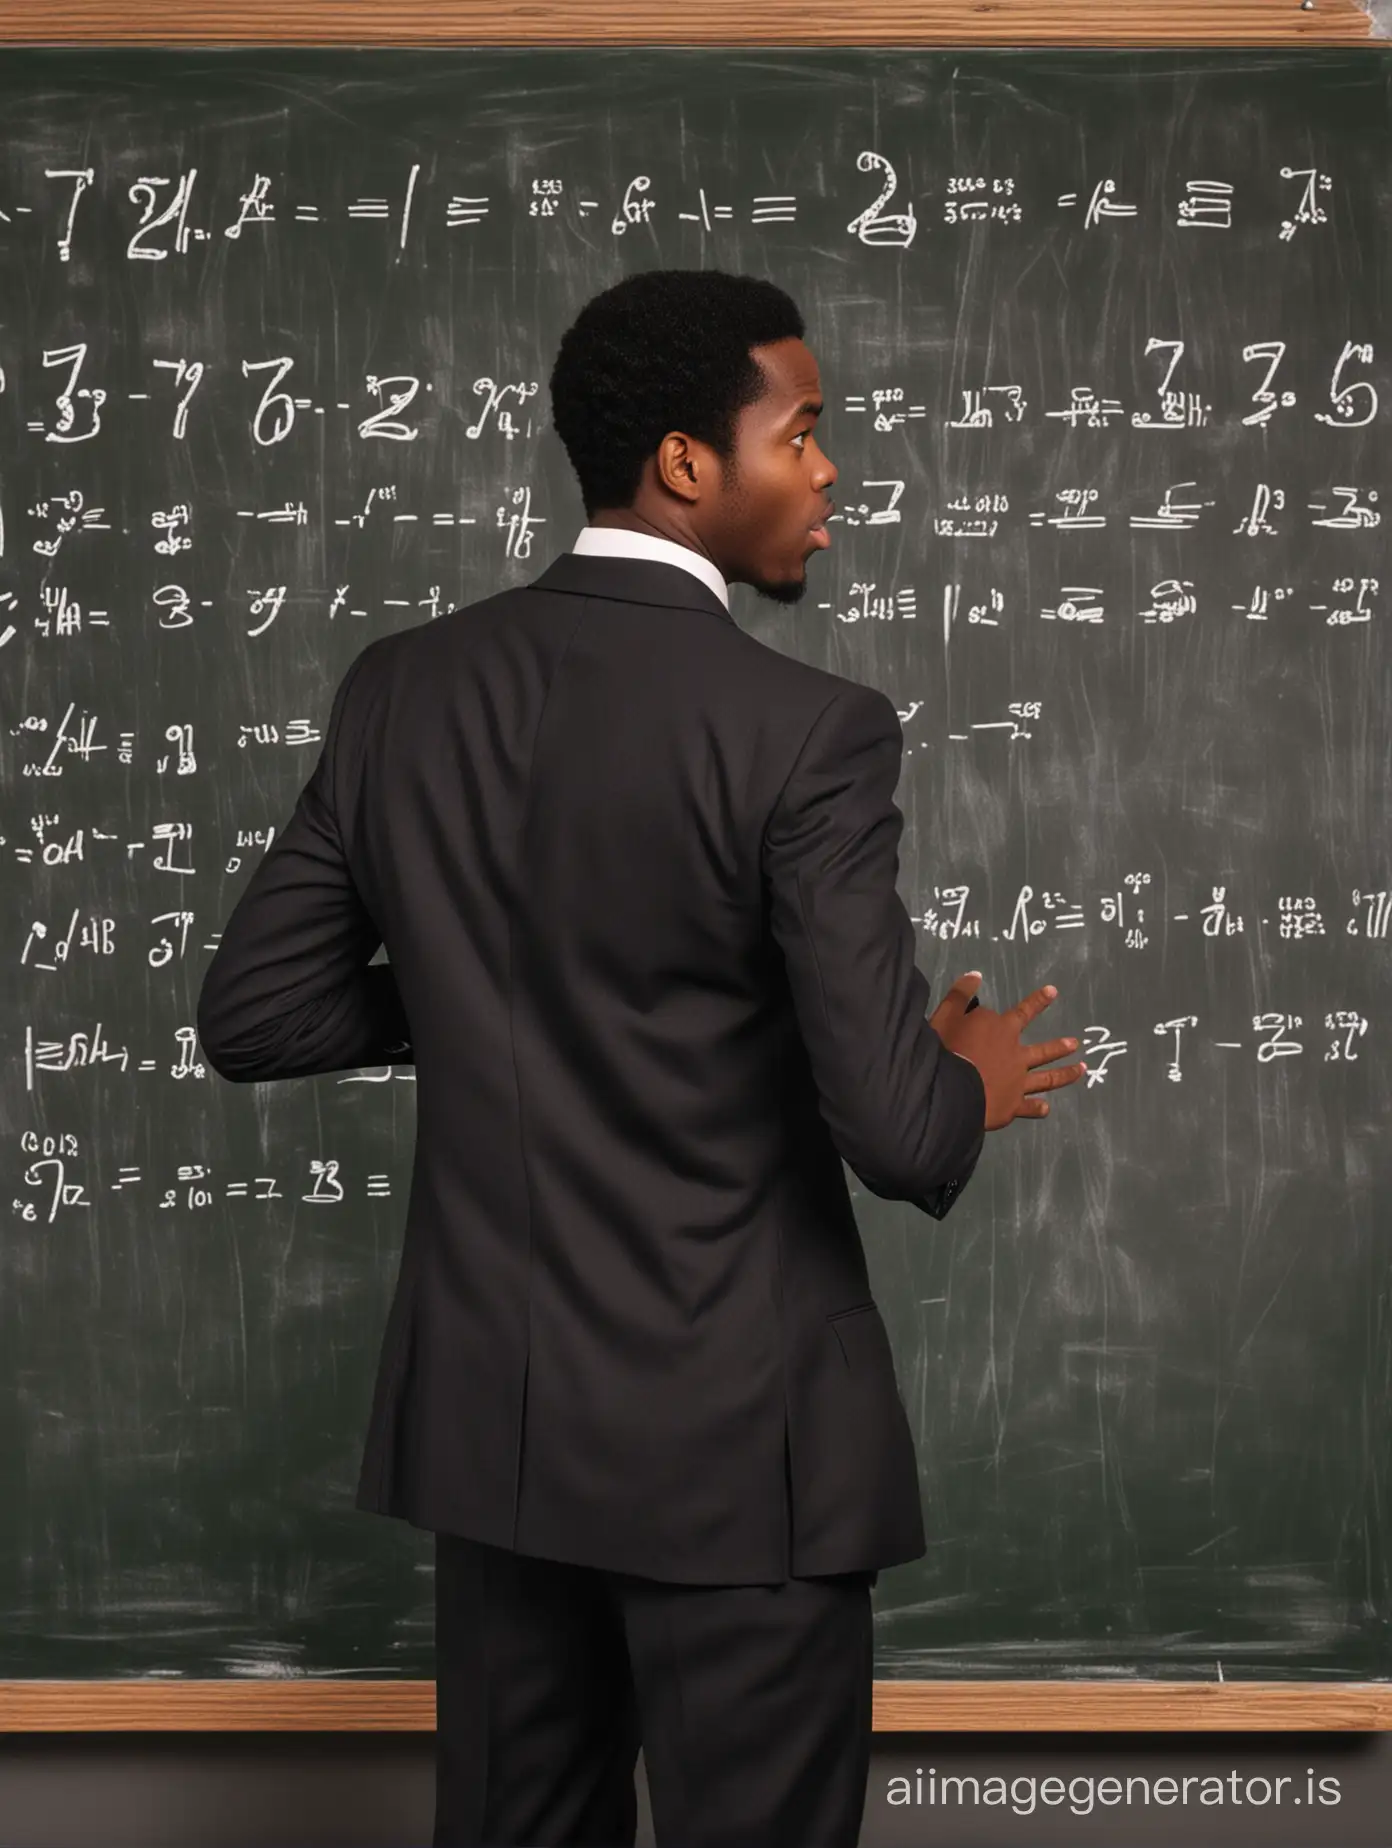 a black man wears a suit stands in front of a blackboard and writhing some math formulas related to number 27 and its formula is so bold and we see his back